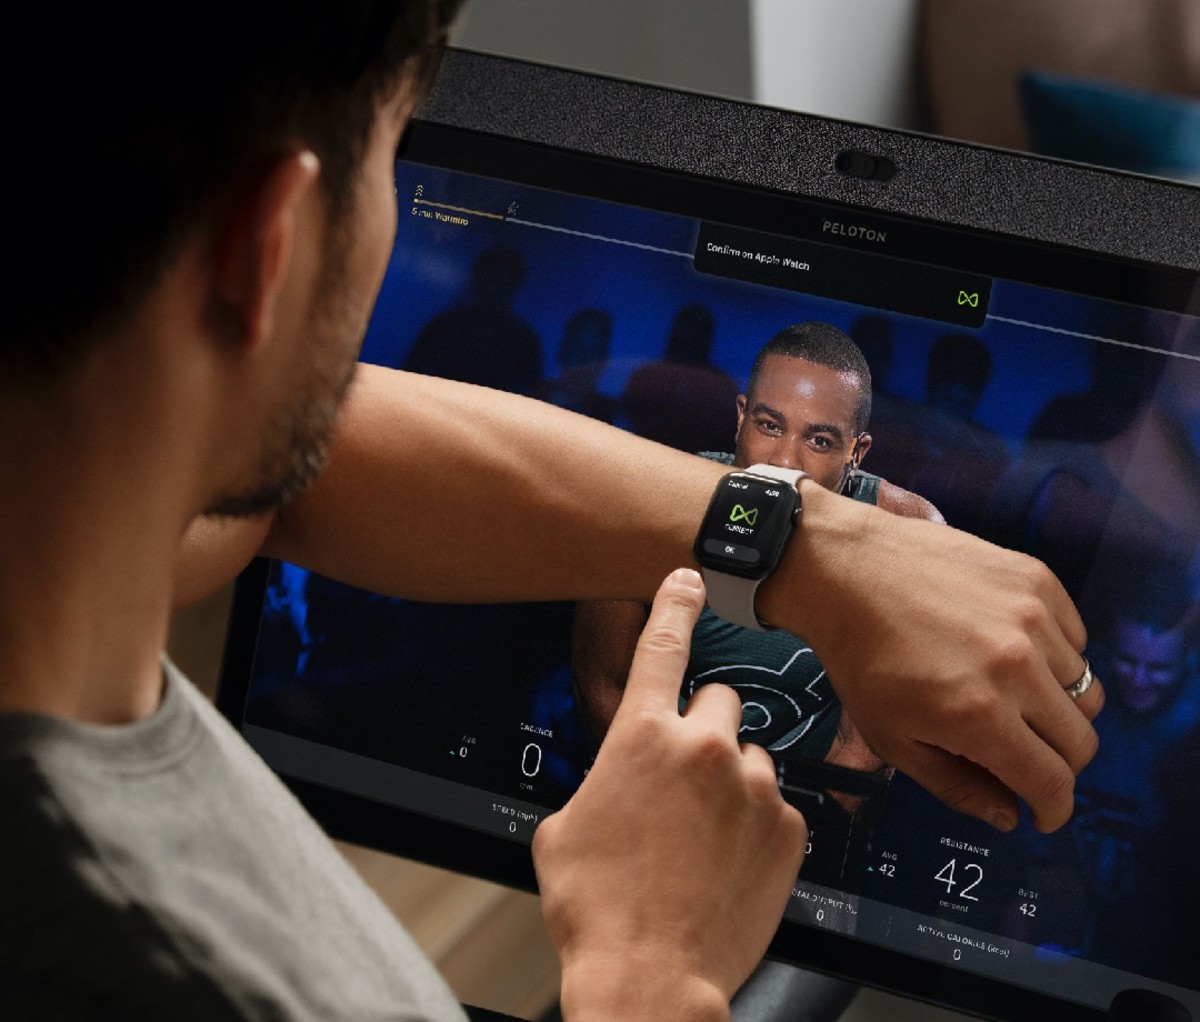 Peloton x Apple Watch Gymkit feature